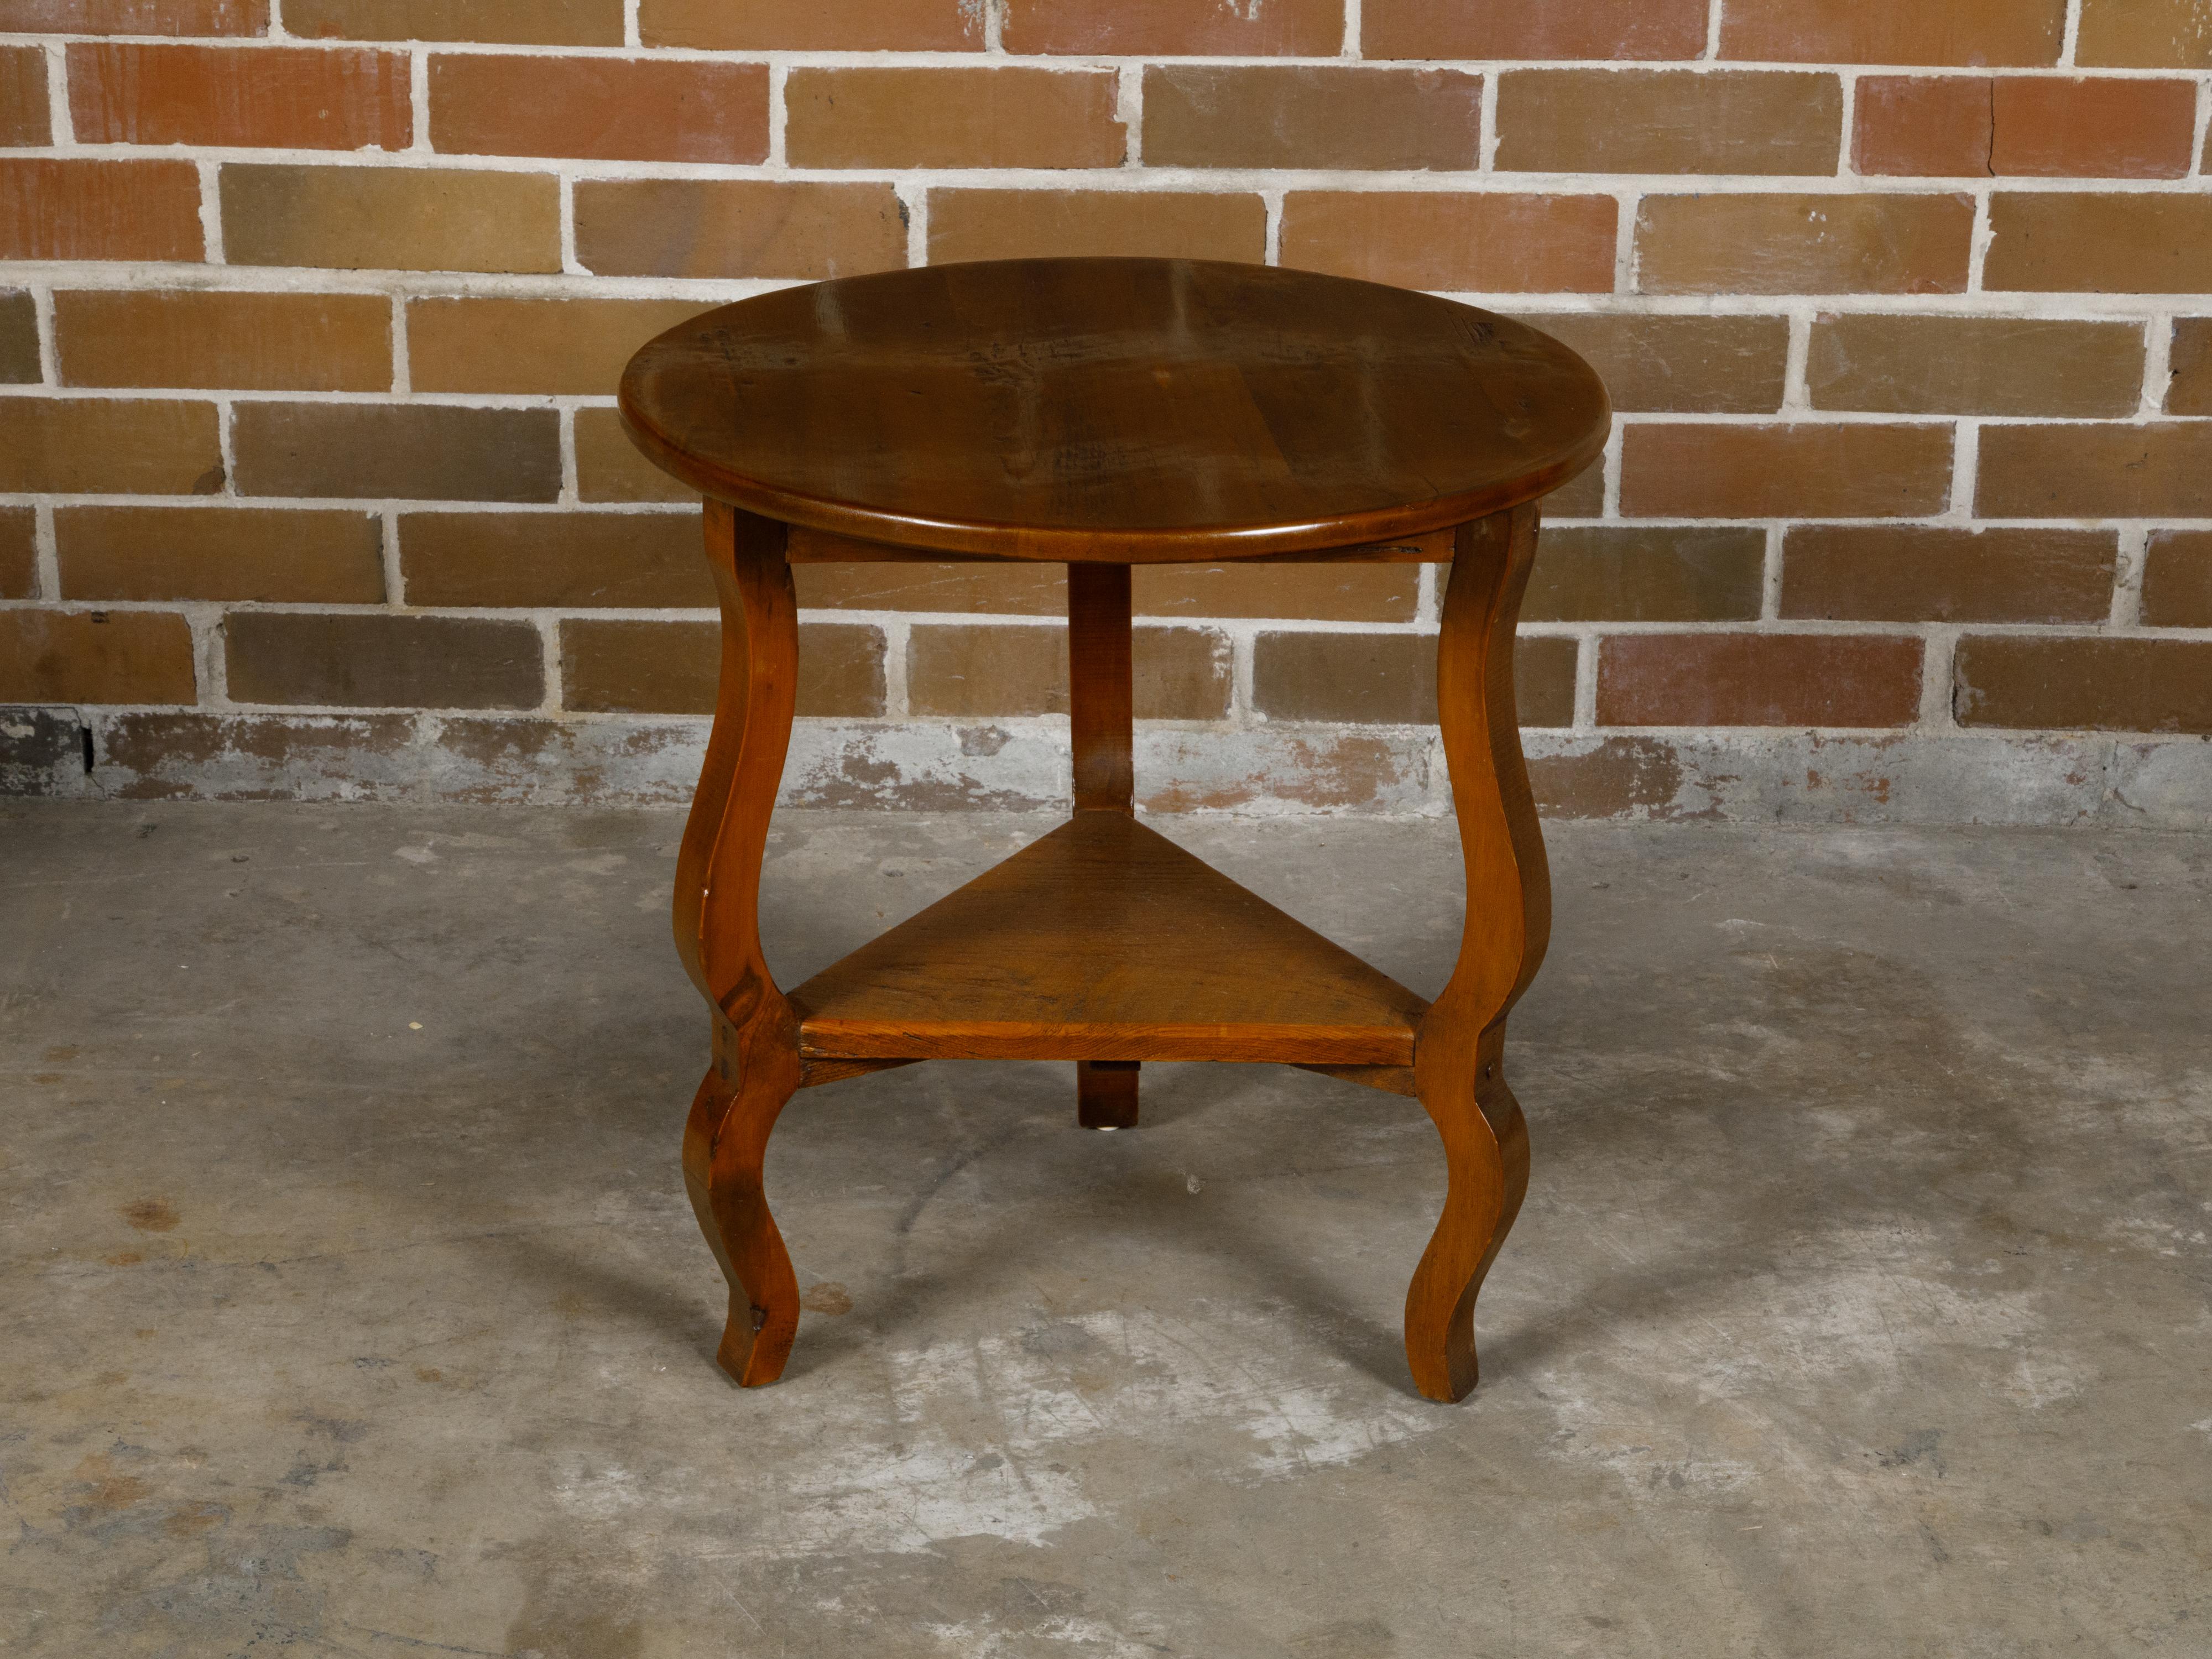 English Pine Side Table with Circular Top, Curving Legs and Triangular Shelf For Sale 5